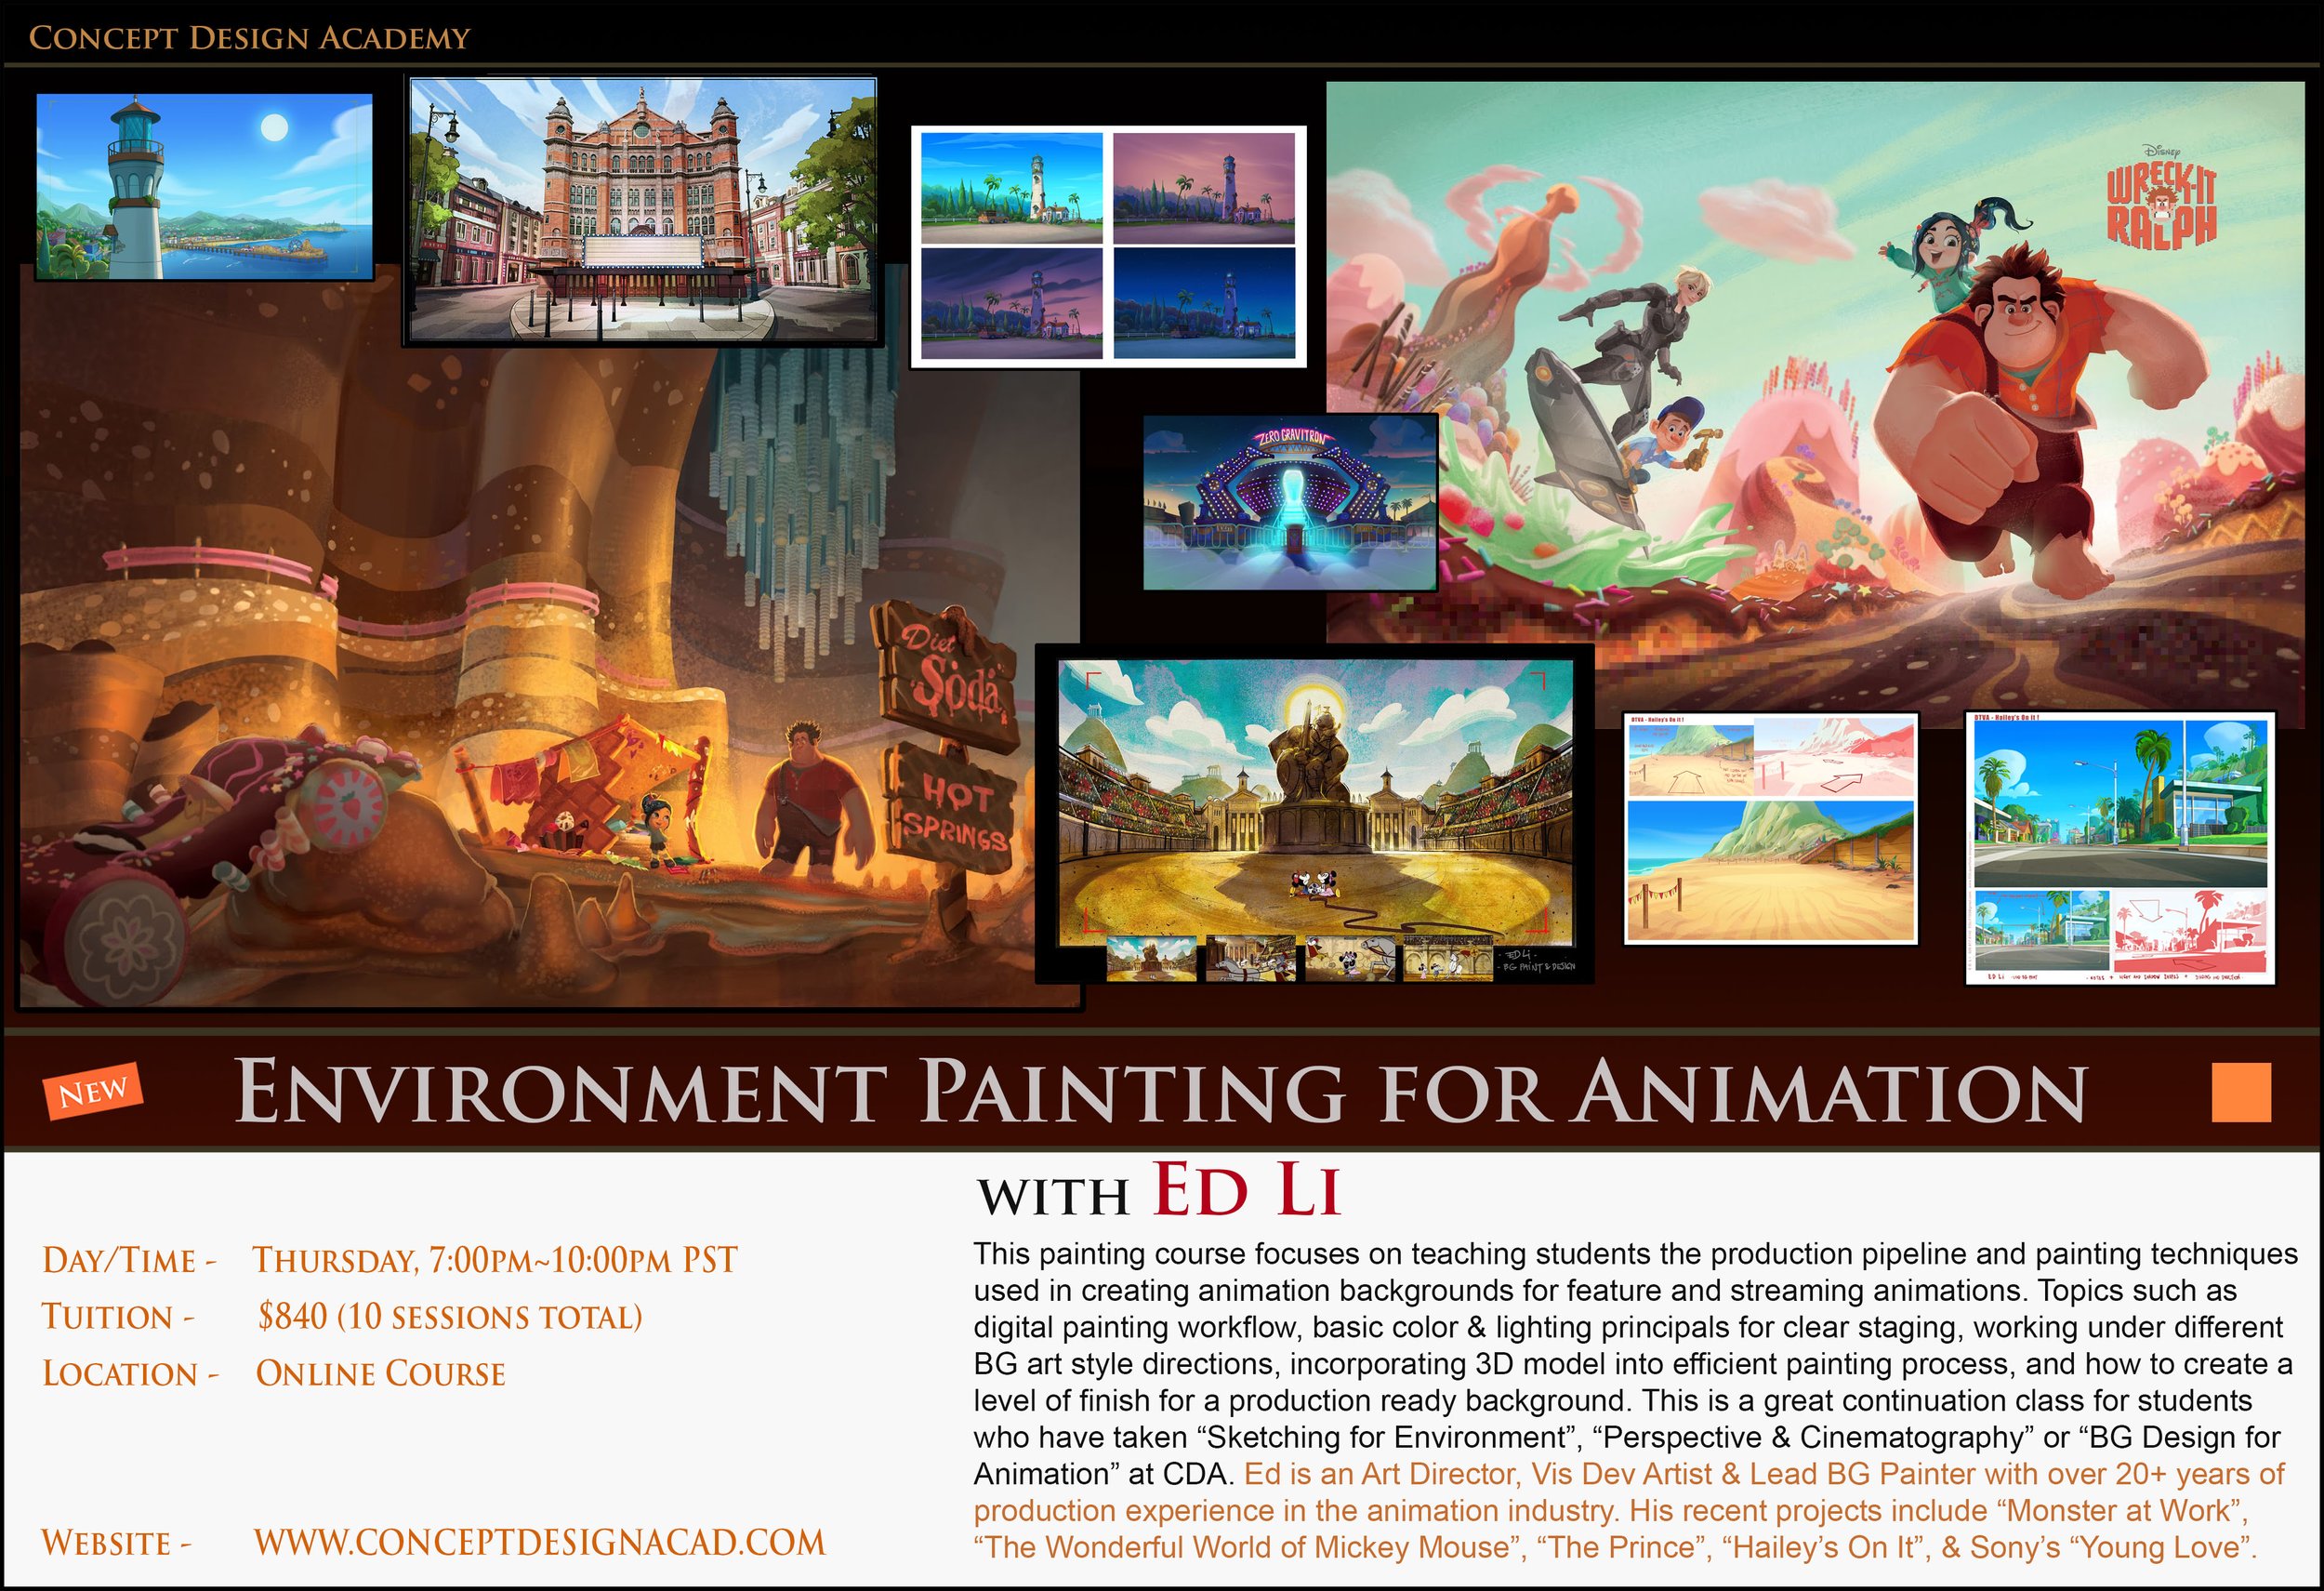 SP24 - Environment Painting for Animation with Ed Li.jpg